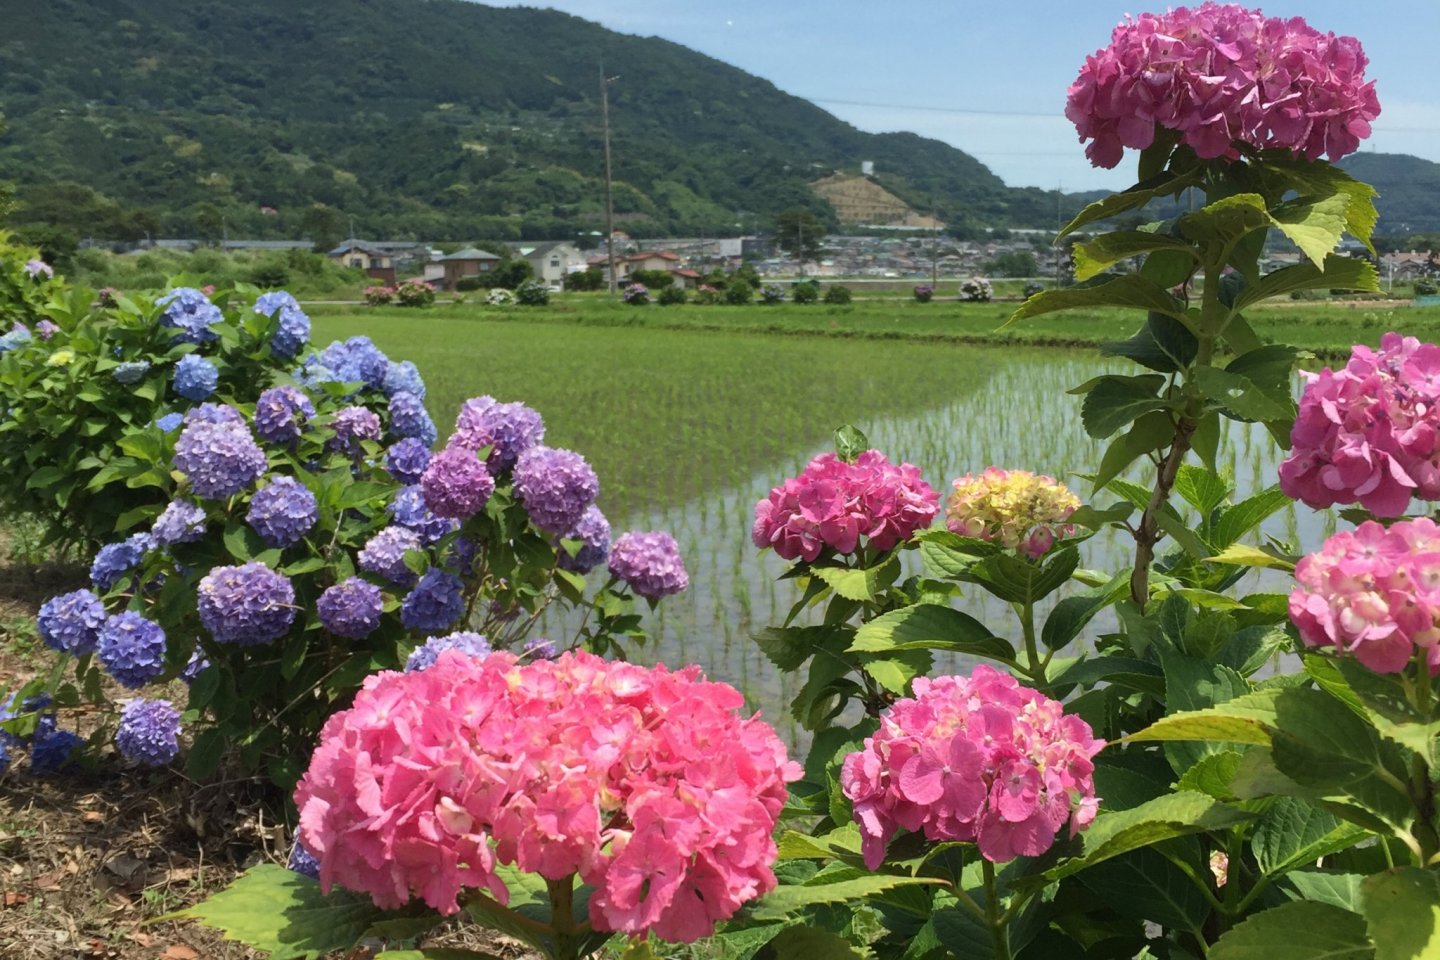 The hydrangeas at this festival come in a variety of hues